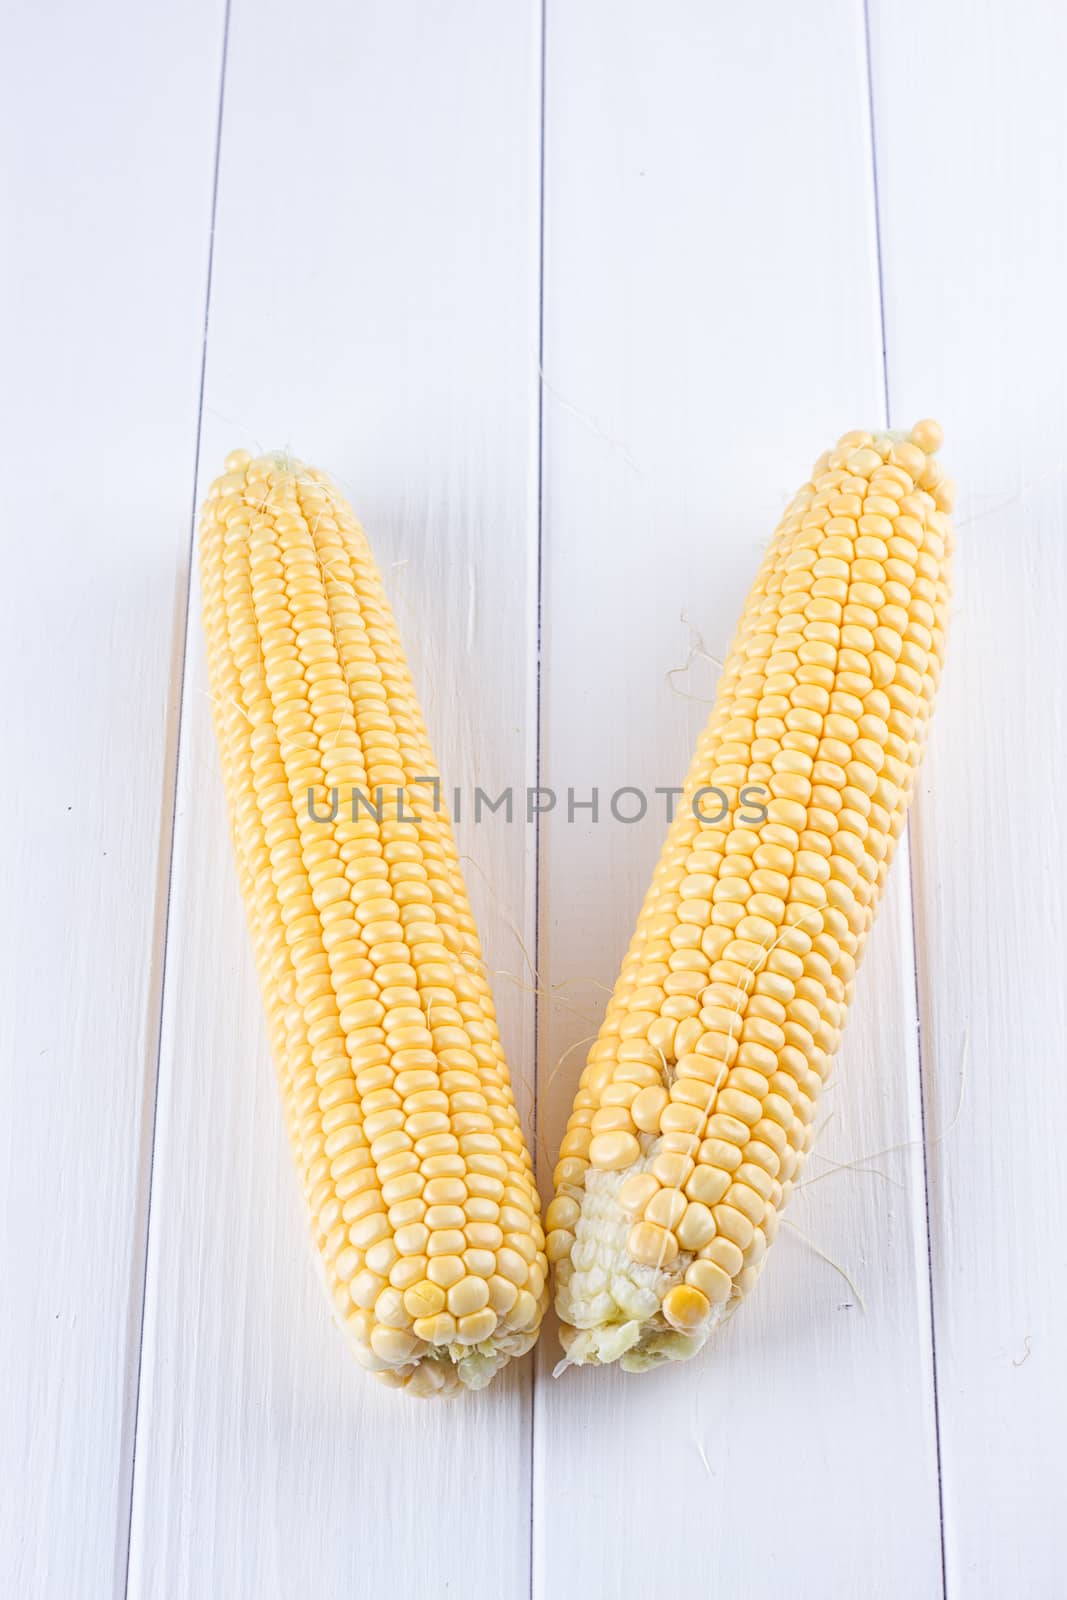 Two raw maize cobs at white wooden table background